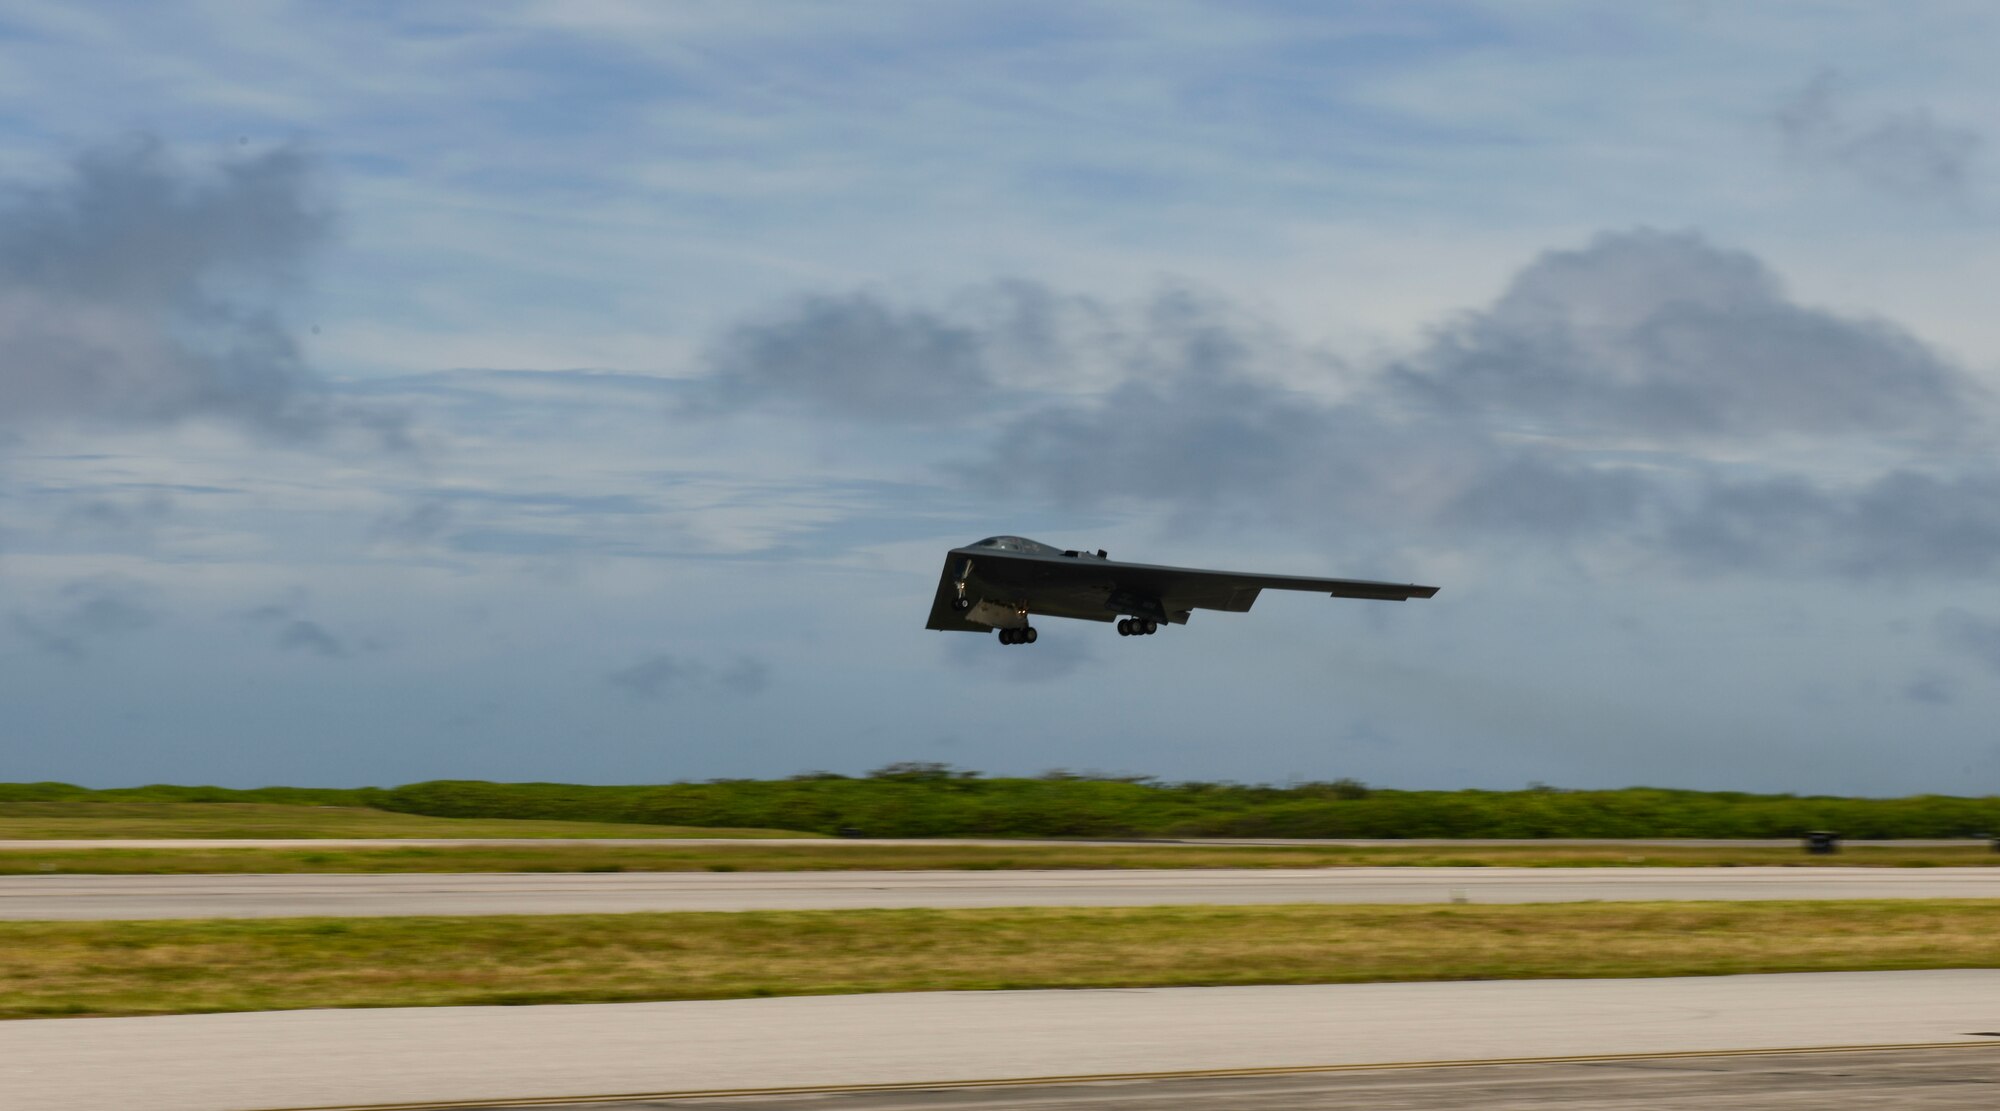 A B-2 Spirit Stealth Bomber, deployed from Whiteman Air Force Base, Missouri, takes off at Naval Support Facility Diego Garcia, in support a Bomber Task Force mission, August 26, 2020. BTF missions allow U.S. Strategic Command to provide persistent, long-term bomber presence to aid in U.S. Indo-Pacific Command’s commitment to a free and open Indo-Pacific. As part of their BTF deployment, the B-2s participated in a combined United States-Australia exercise with Marine Rotational Force-Darwin and Australian Defence Forces. During the exercise, MRF-D and ADF Joint Terminal Attack Controllers coordinated airstrikes with U.S. Air Force B-1B Lancers and B-2 Spirit Stealth Bombers. (U.S Air Force photo by Tech. Sgt. Heather Salazar)